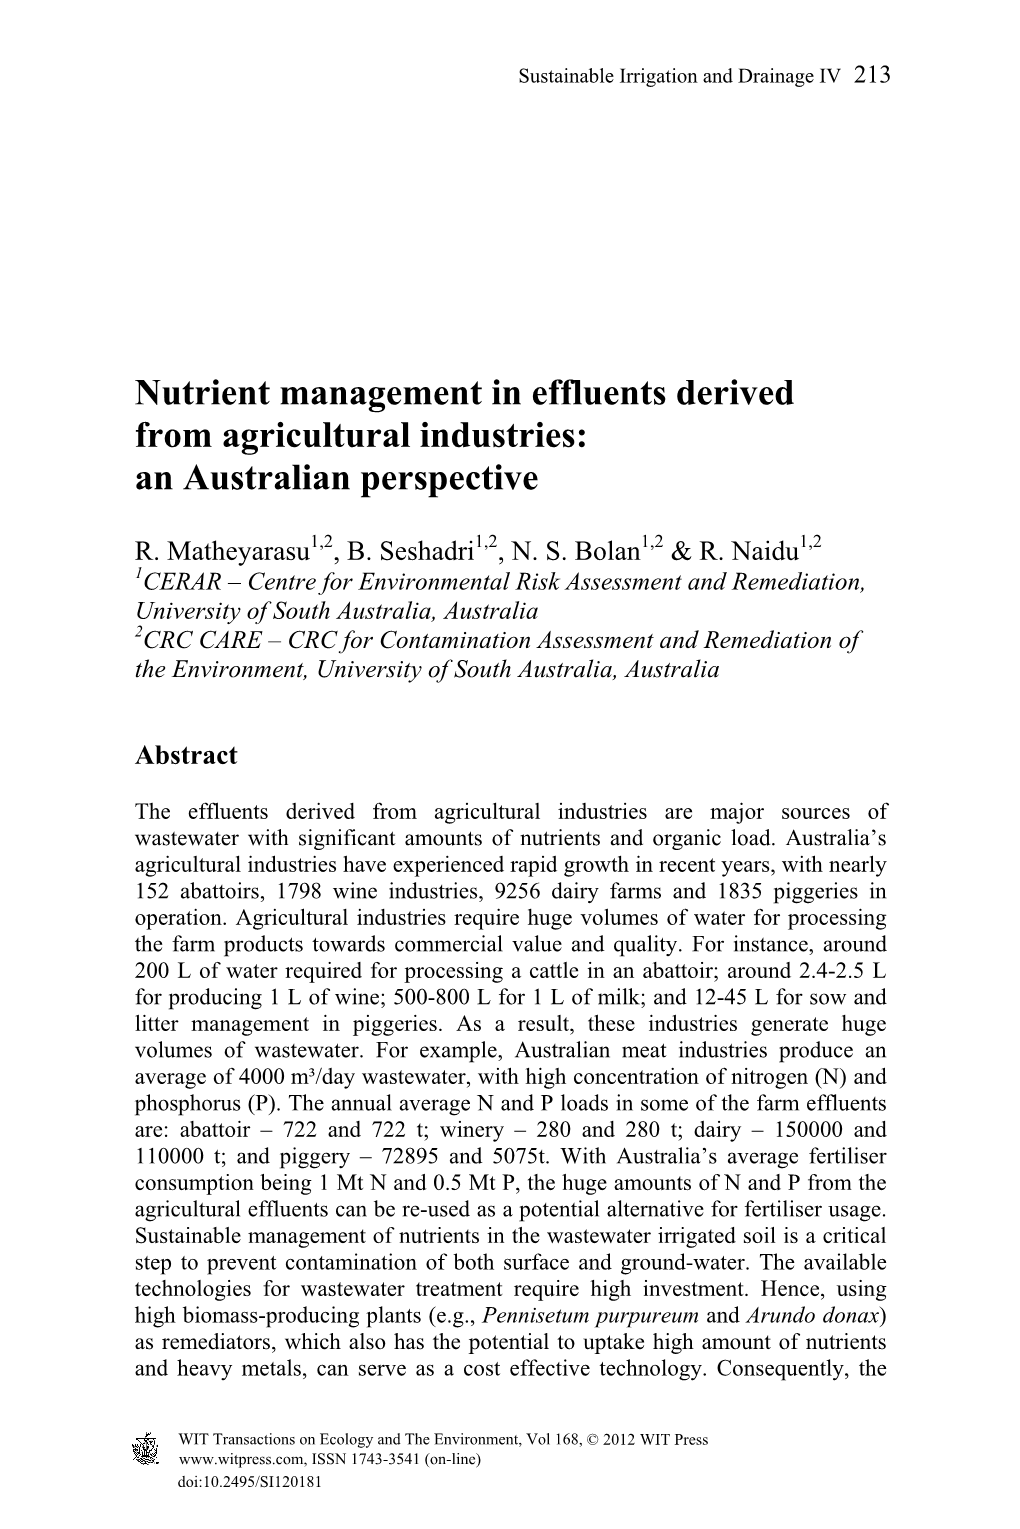 Nutrient Management in Effluents Derived from Agricultural Industries: an Australian Perspective